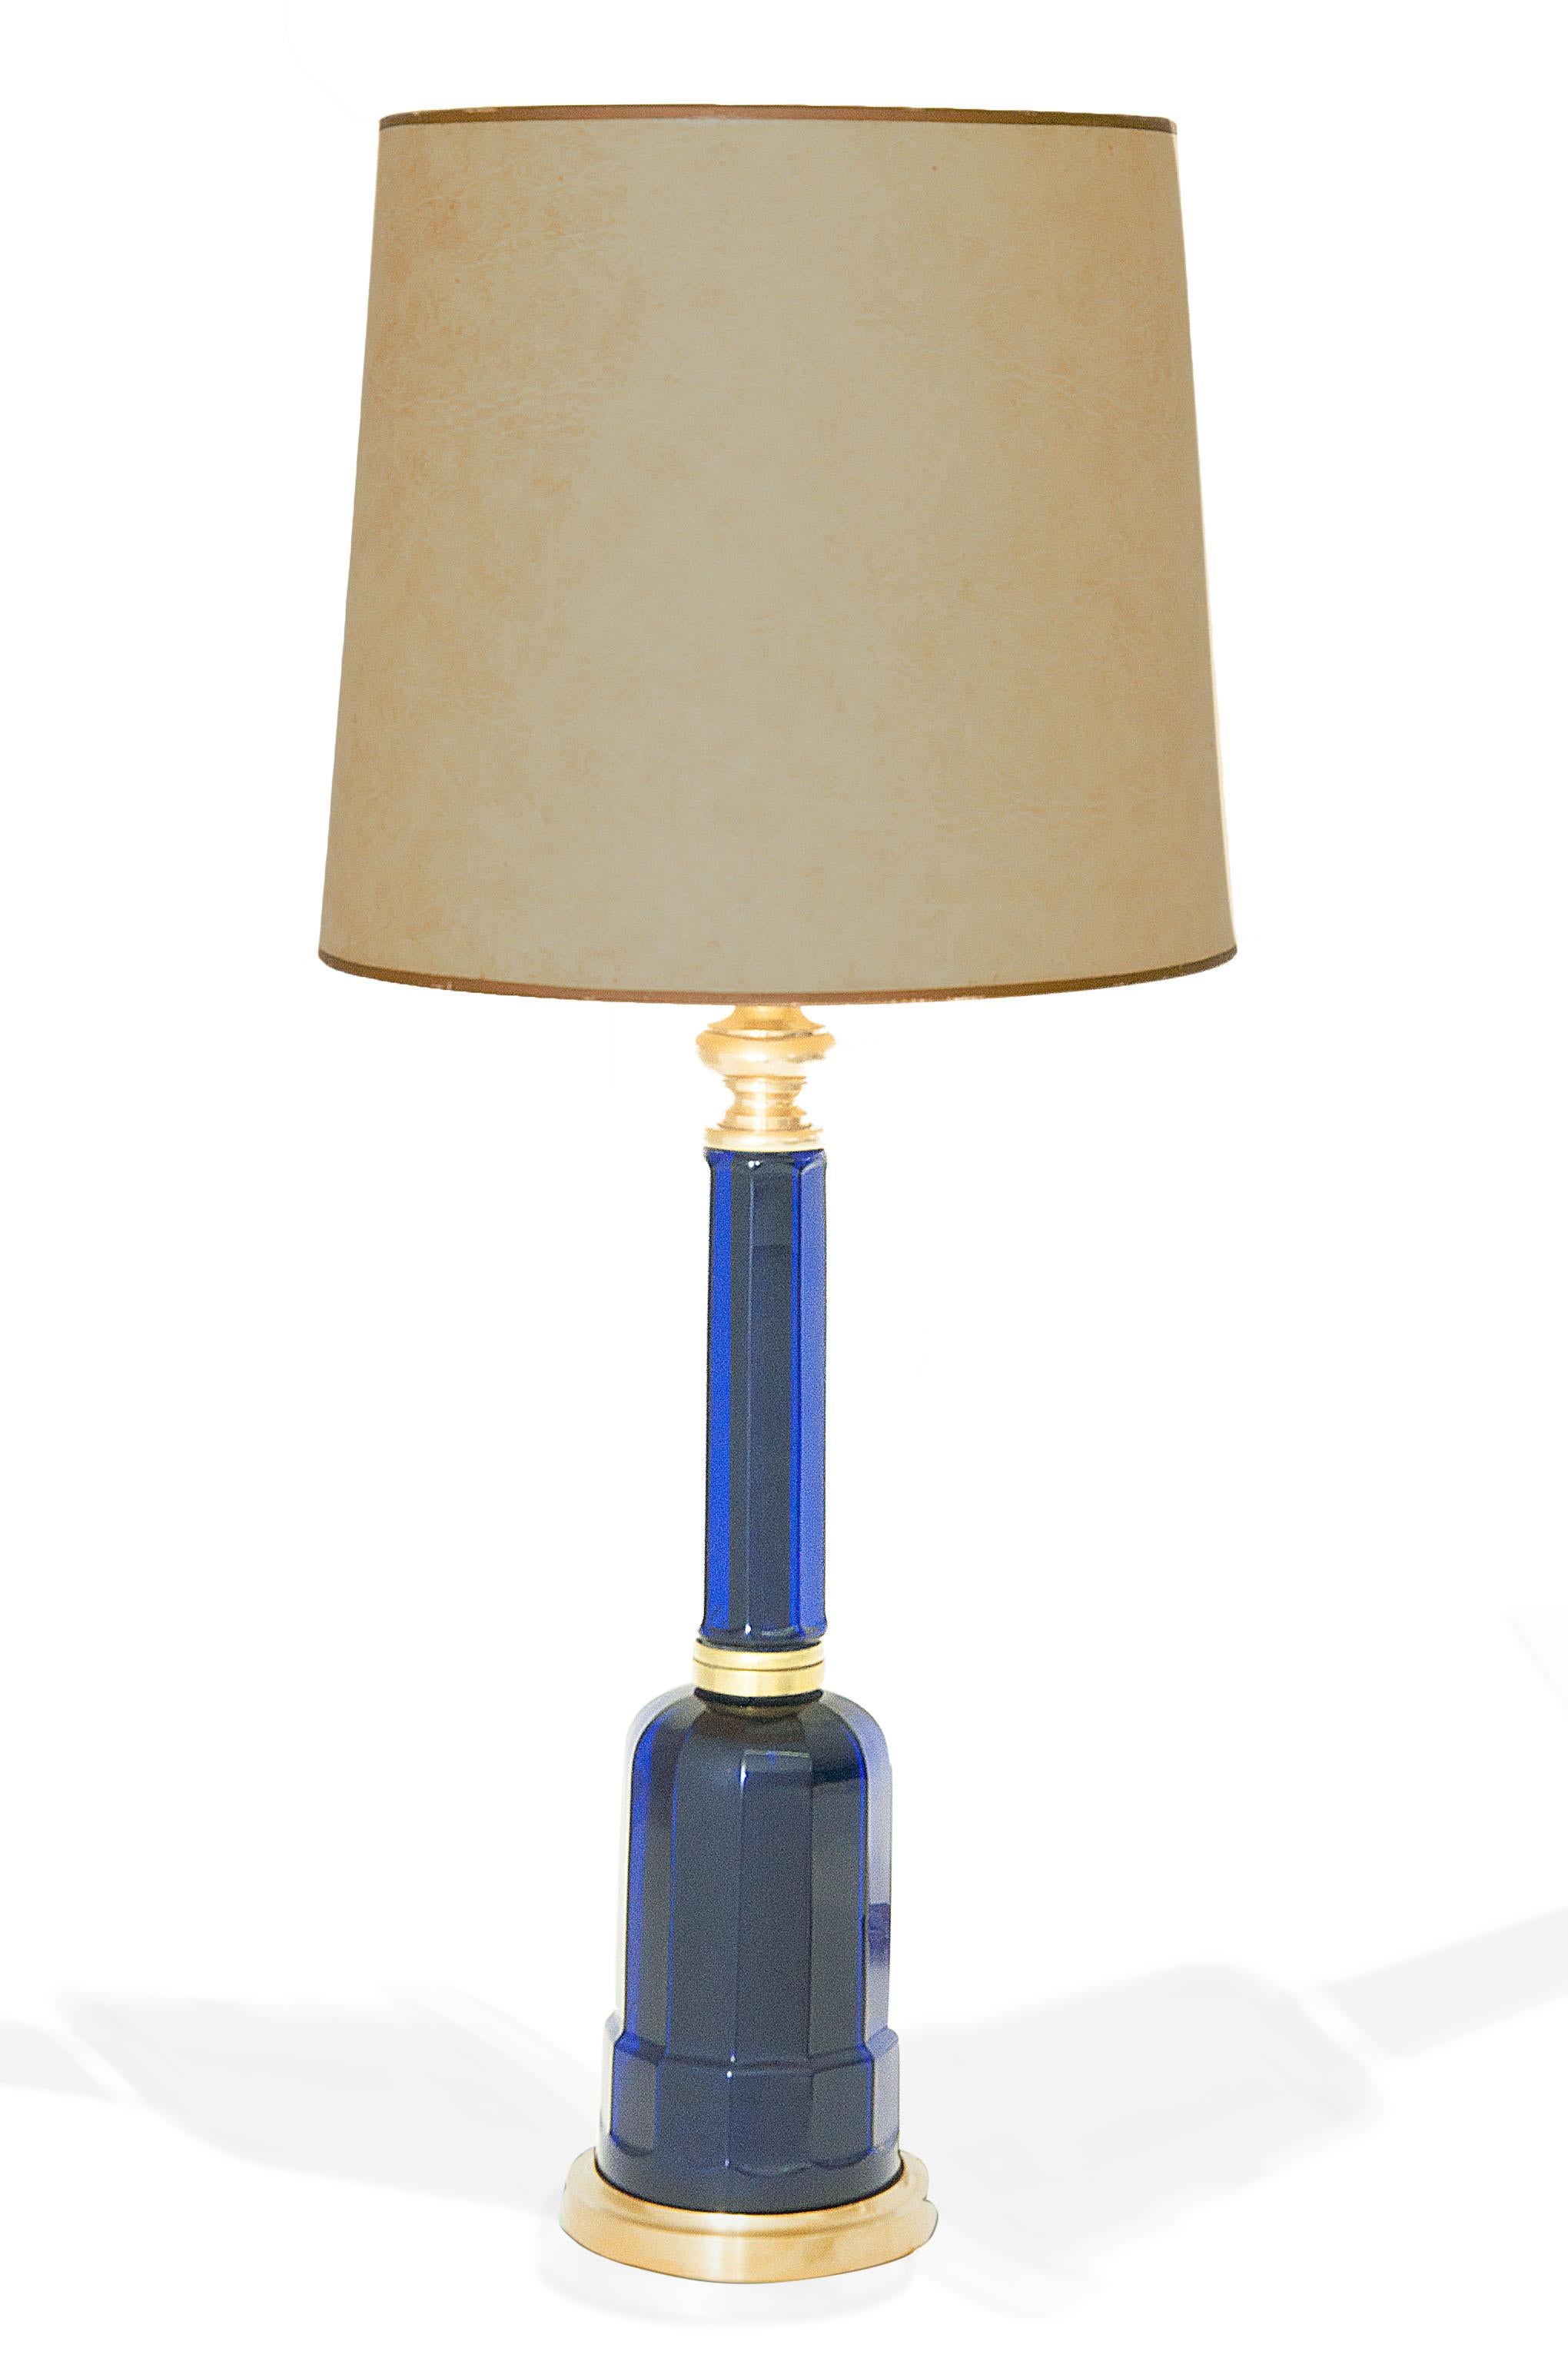 Late 20th Century Table Lamp in Blue Glass and Brass, Large, 1970, in the Murano Style